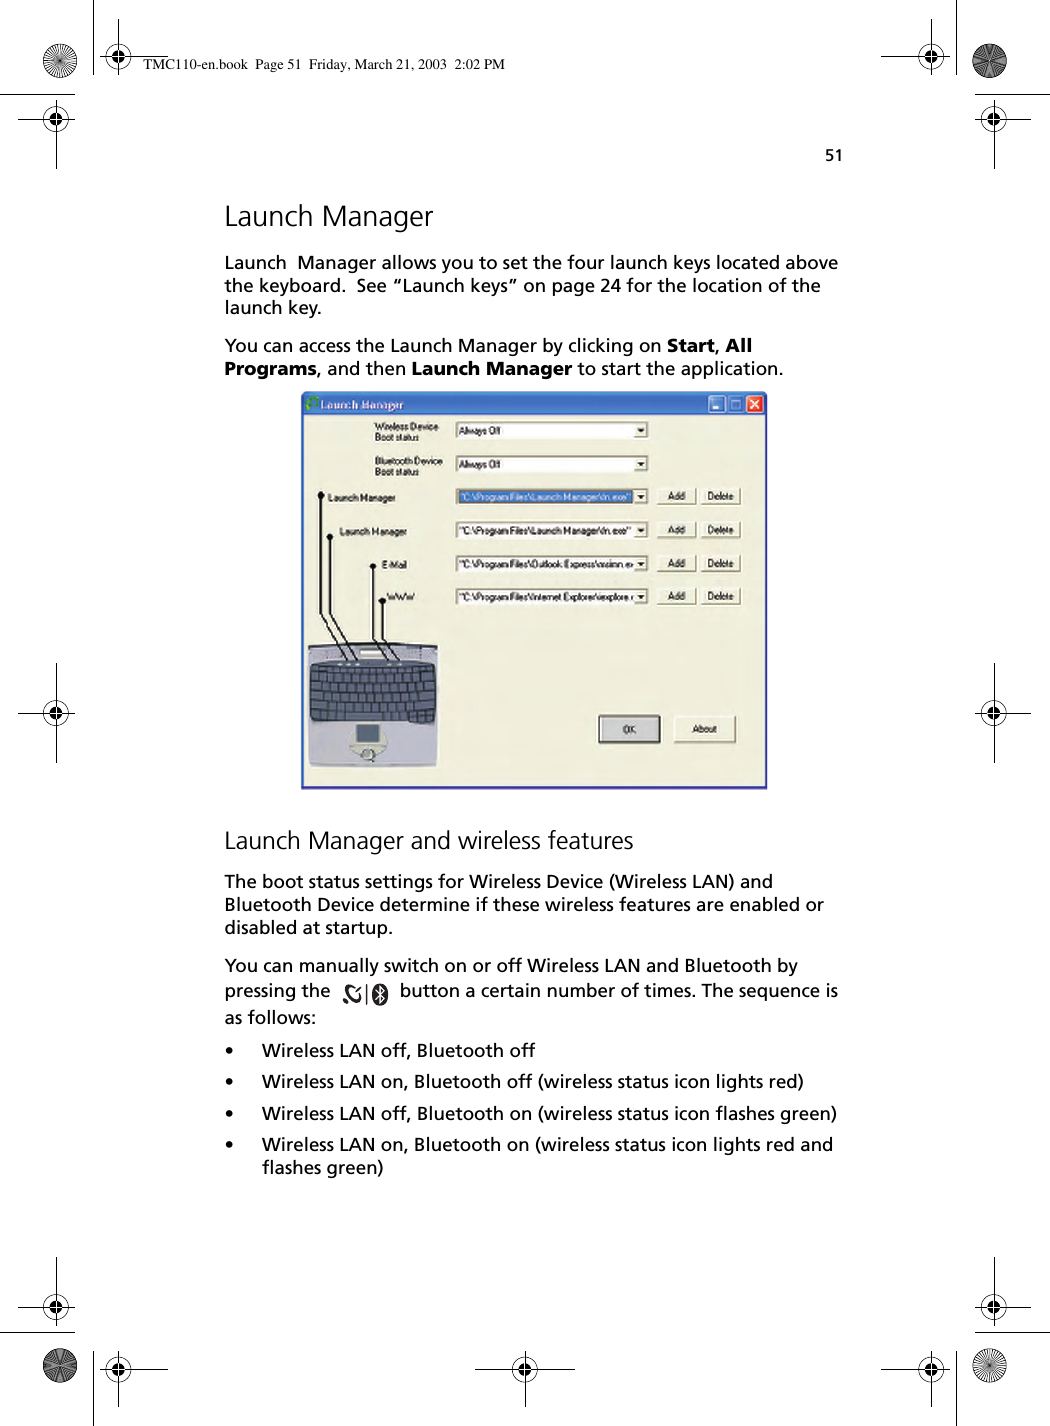 51Launch ManagerLaunch  Manager allows you to set the four launch keys located above the keyboard.  See “Launch keys” on page 24 for the location of the launch key.  You can access the Launch Manager by clicking on Start, All Programs, and then Launch Manager to start the application. Launch Manager and wireless featuresThe boot status settings for Wireless Device (Wireless LAN) and Bluetooth Device determine if these wireless features are enabled or disabled at startup.You can manually switch on or off Wireless LAN and Bluetooth by pressing the   button a certain number of times. The sequence is as follows:• Wireless LAN off, Bluetooth off• Wireless LAN on, Bluetooth off (wireless status icon lights red)• Wireless LAN off, Bluetooth on (wireless status icon flashes green)• Wireless LAN on, Bluetooth on (wireless status icon lights red and flashes green)TMC110-en.book  Page 51  Friday, March 21, 2003  2:02 PM